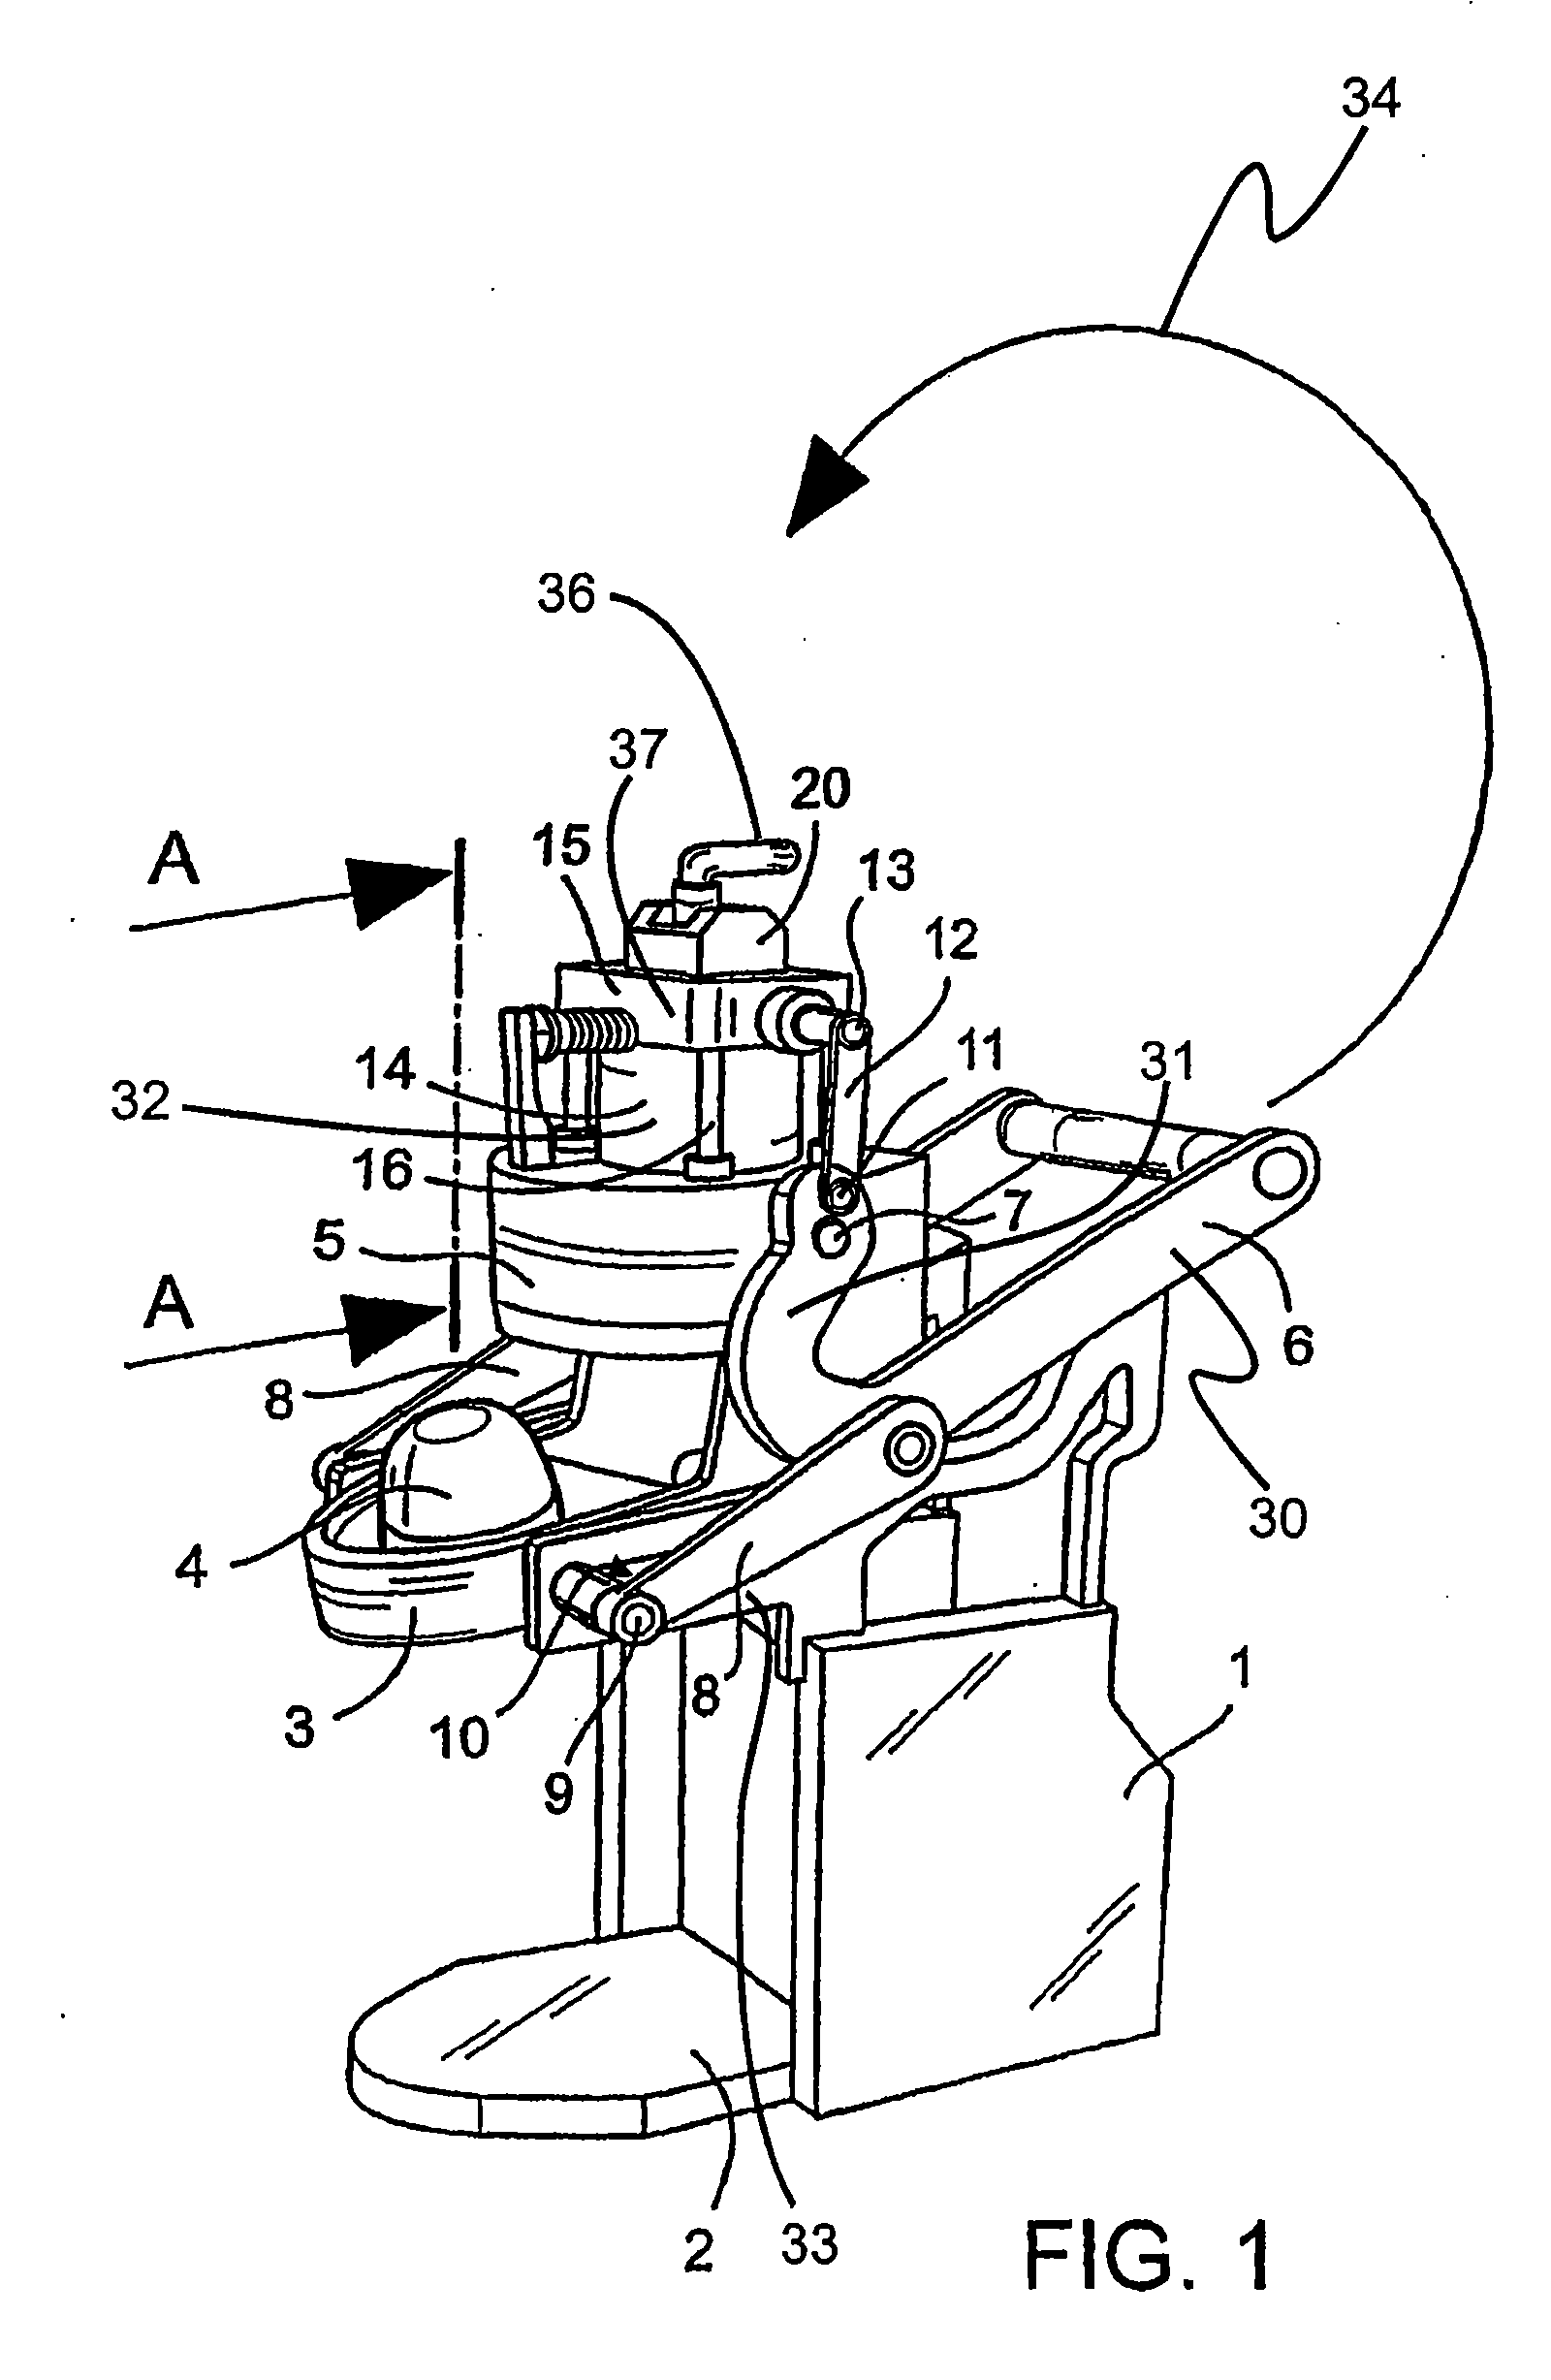 Methods of preparing a food product from a cartridge